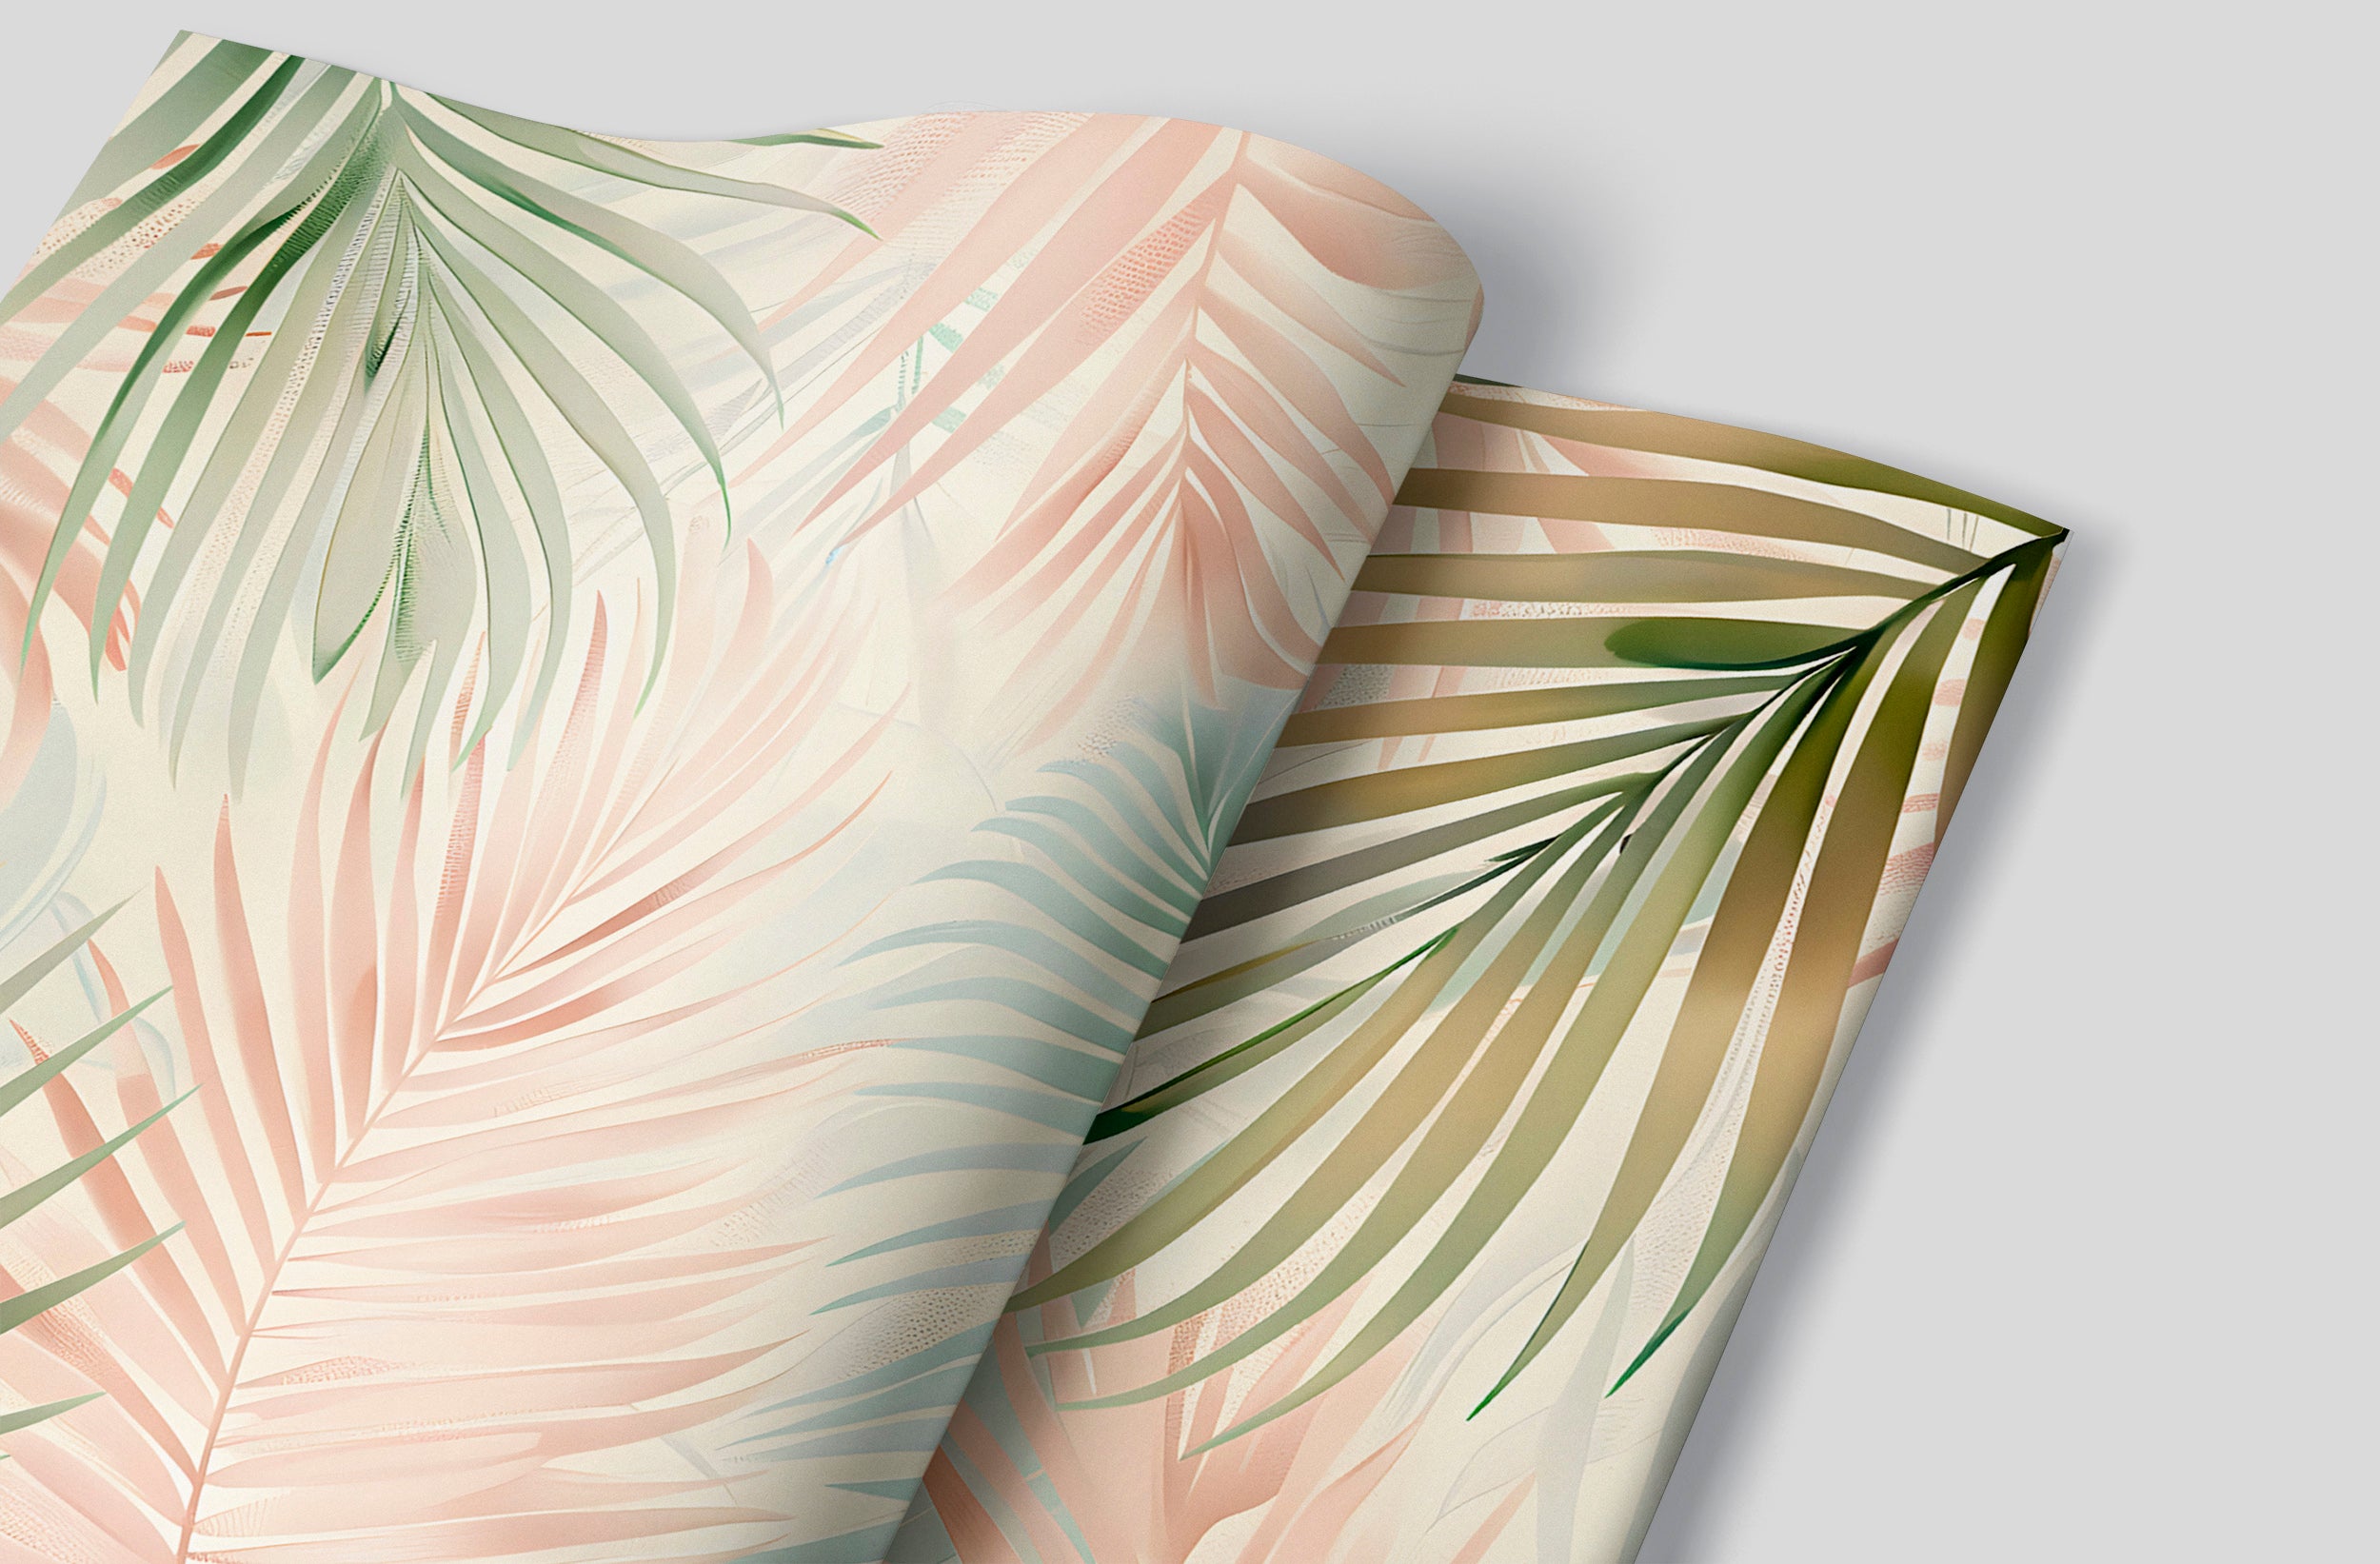 Colorful Palm Leaf Mural, Pastel Colors Tropical Wallpaper, Peel and Stick Nursery Botanical Wall Decal, Custom Size Removable Wall Decor